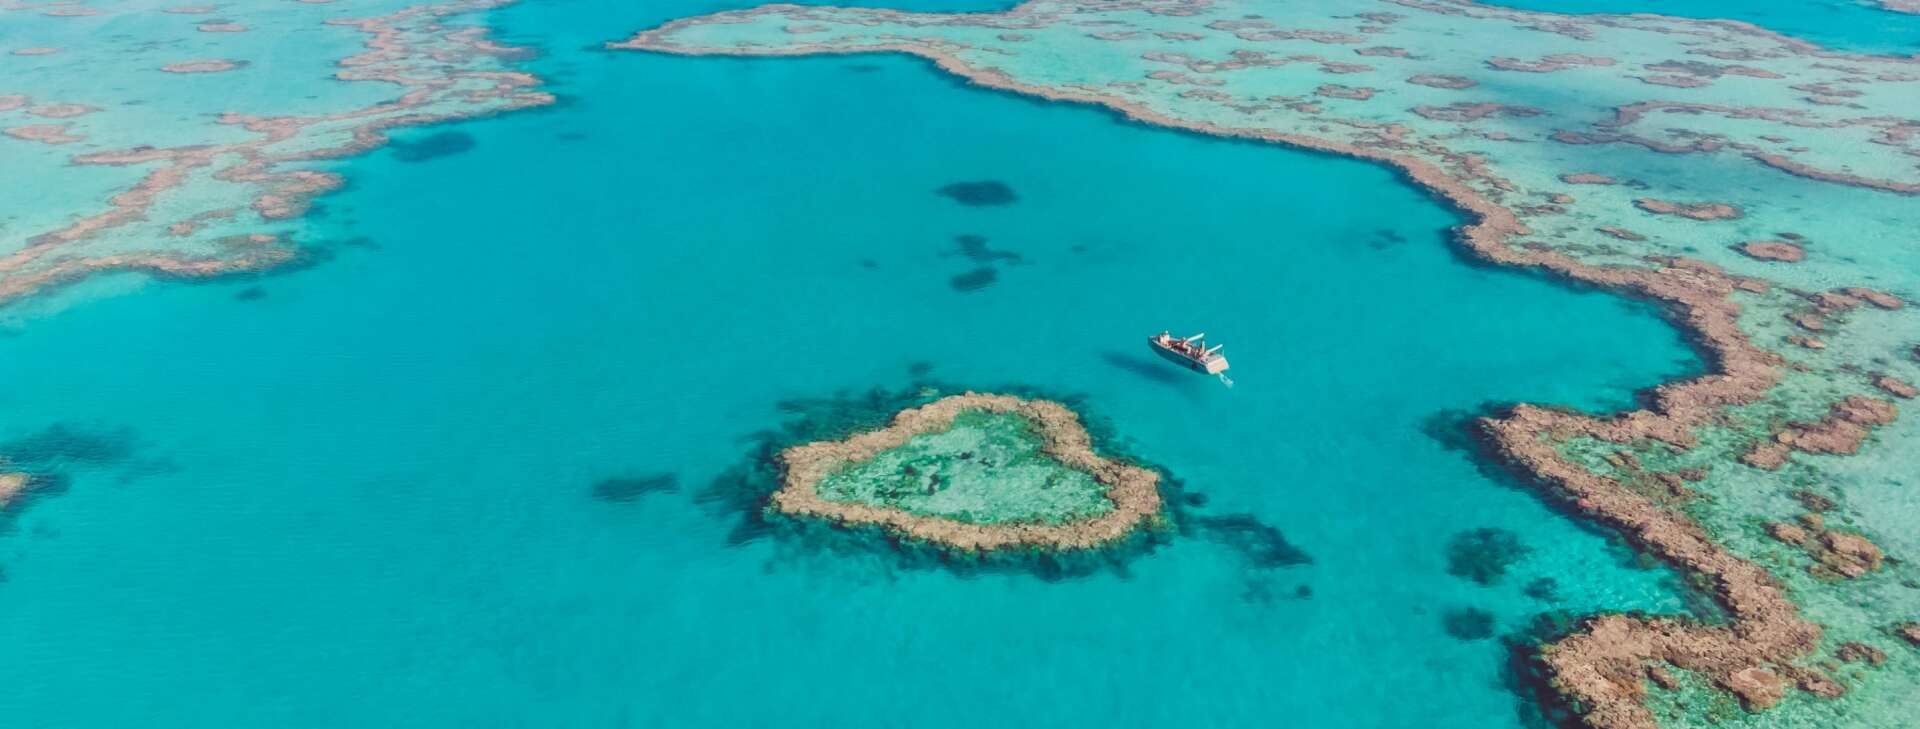 Heart Reef, Whitsundays, Queensland © Tourism and Events Queensland/Ashleigh Clarke